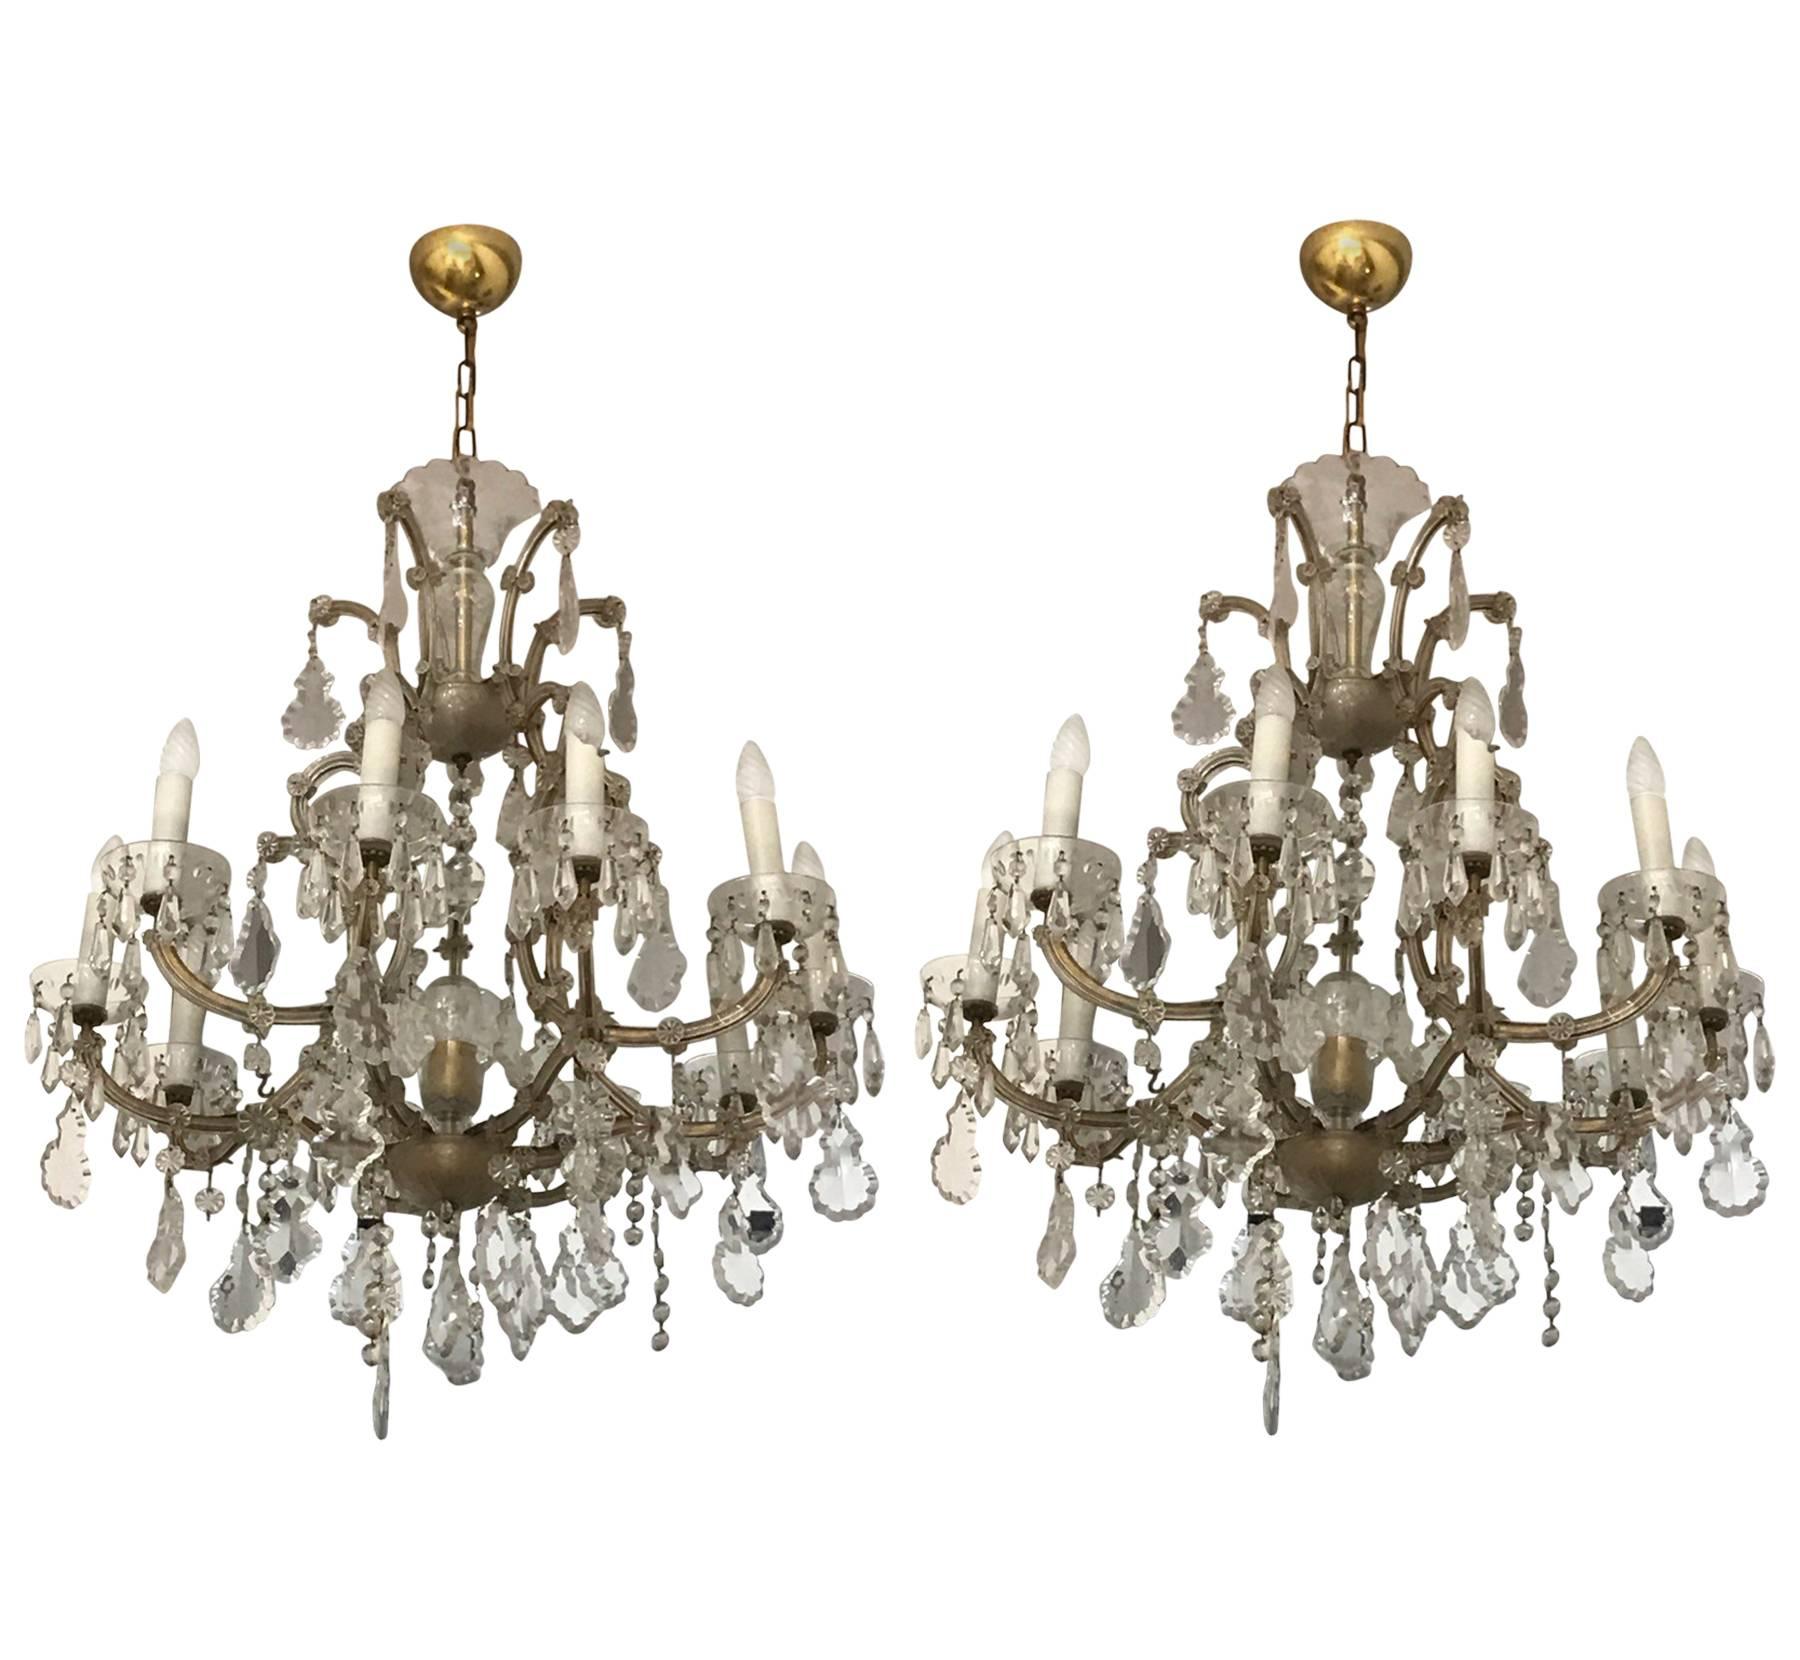 Pair of Crystal Chandeliers and Murano Glass, 20th Century